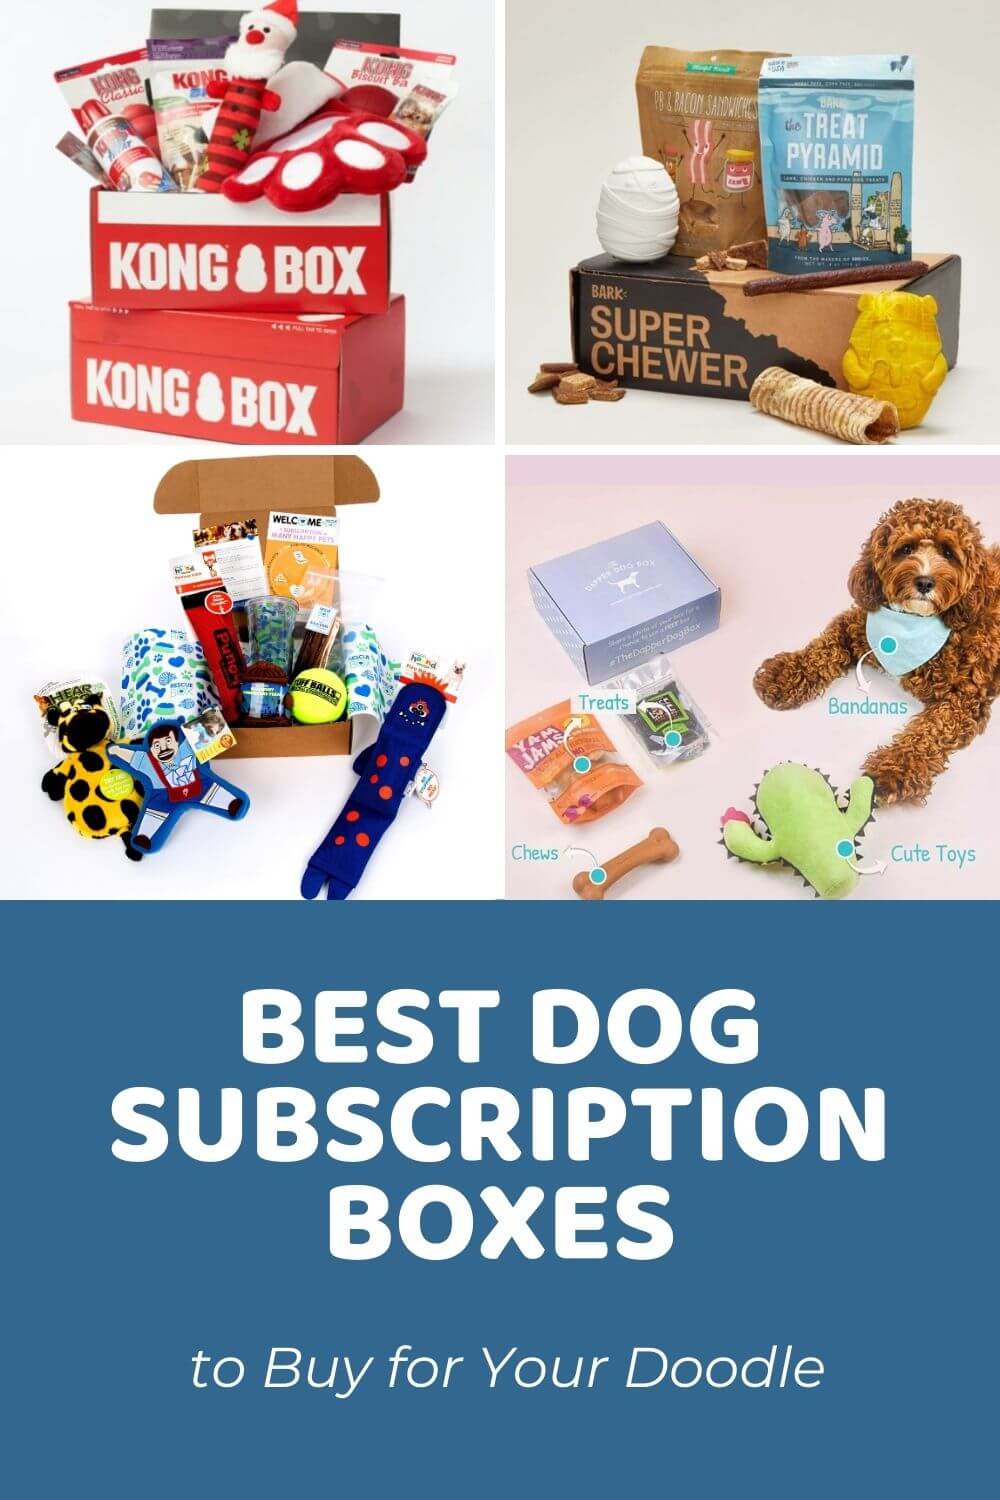 The Best Dog Subscription Box to Buy for Your Doodle